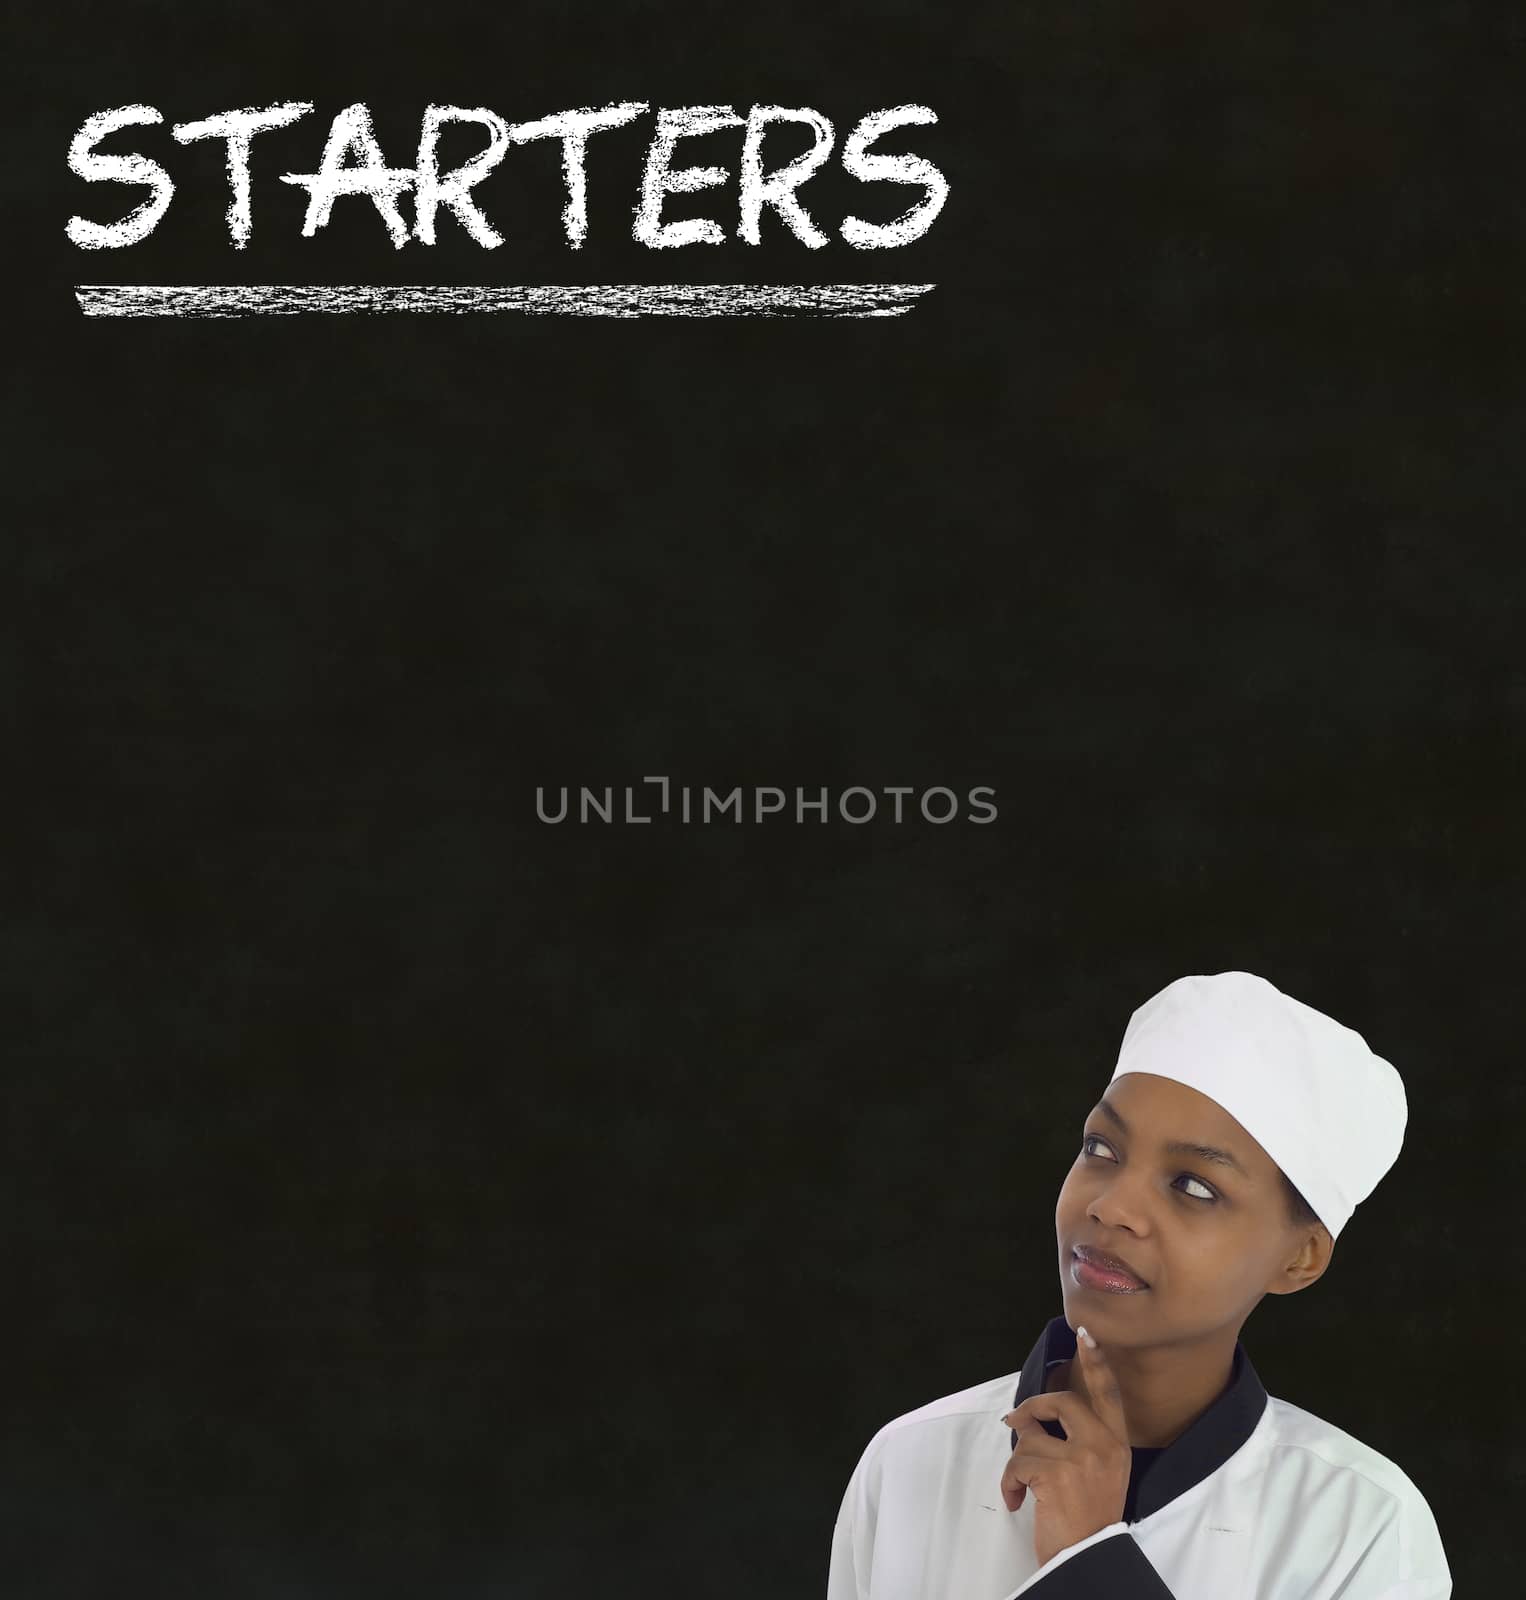 Chef with chalk starters sign on blackboard background by alistaircotton